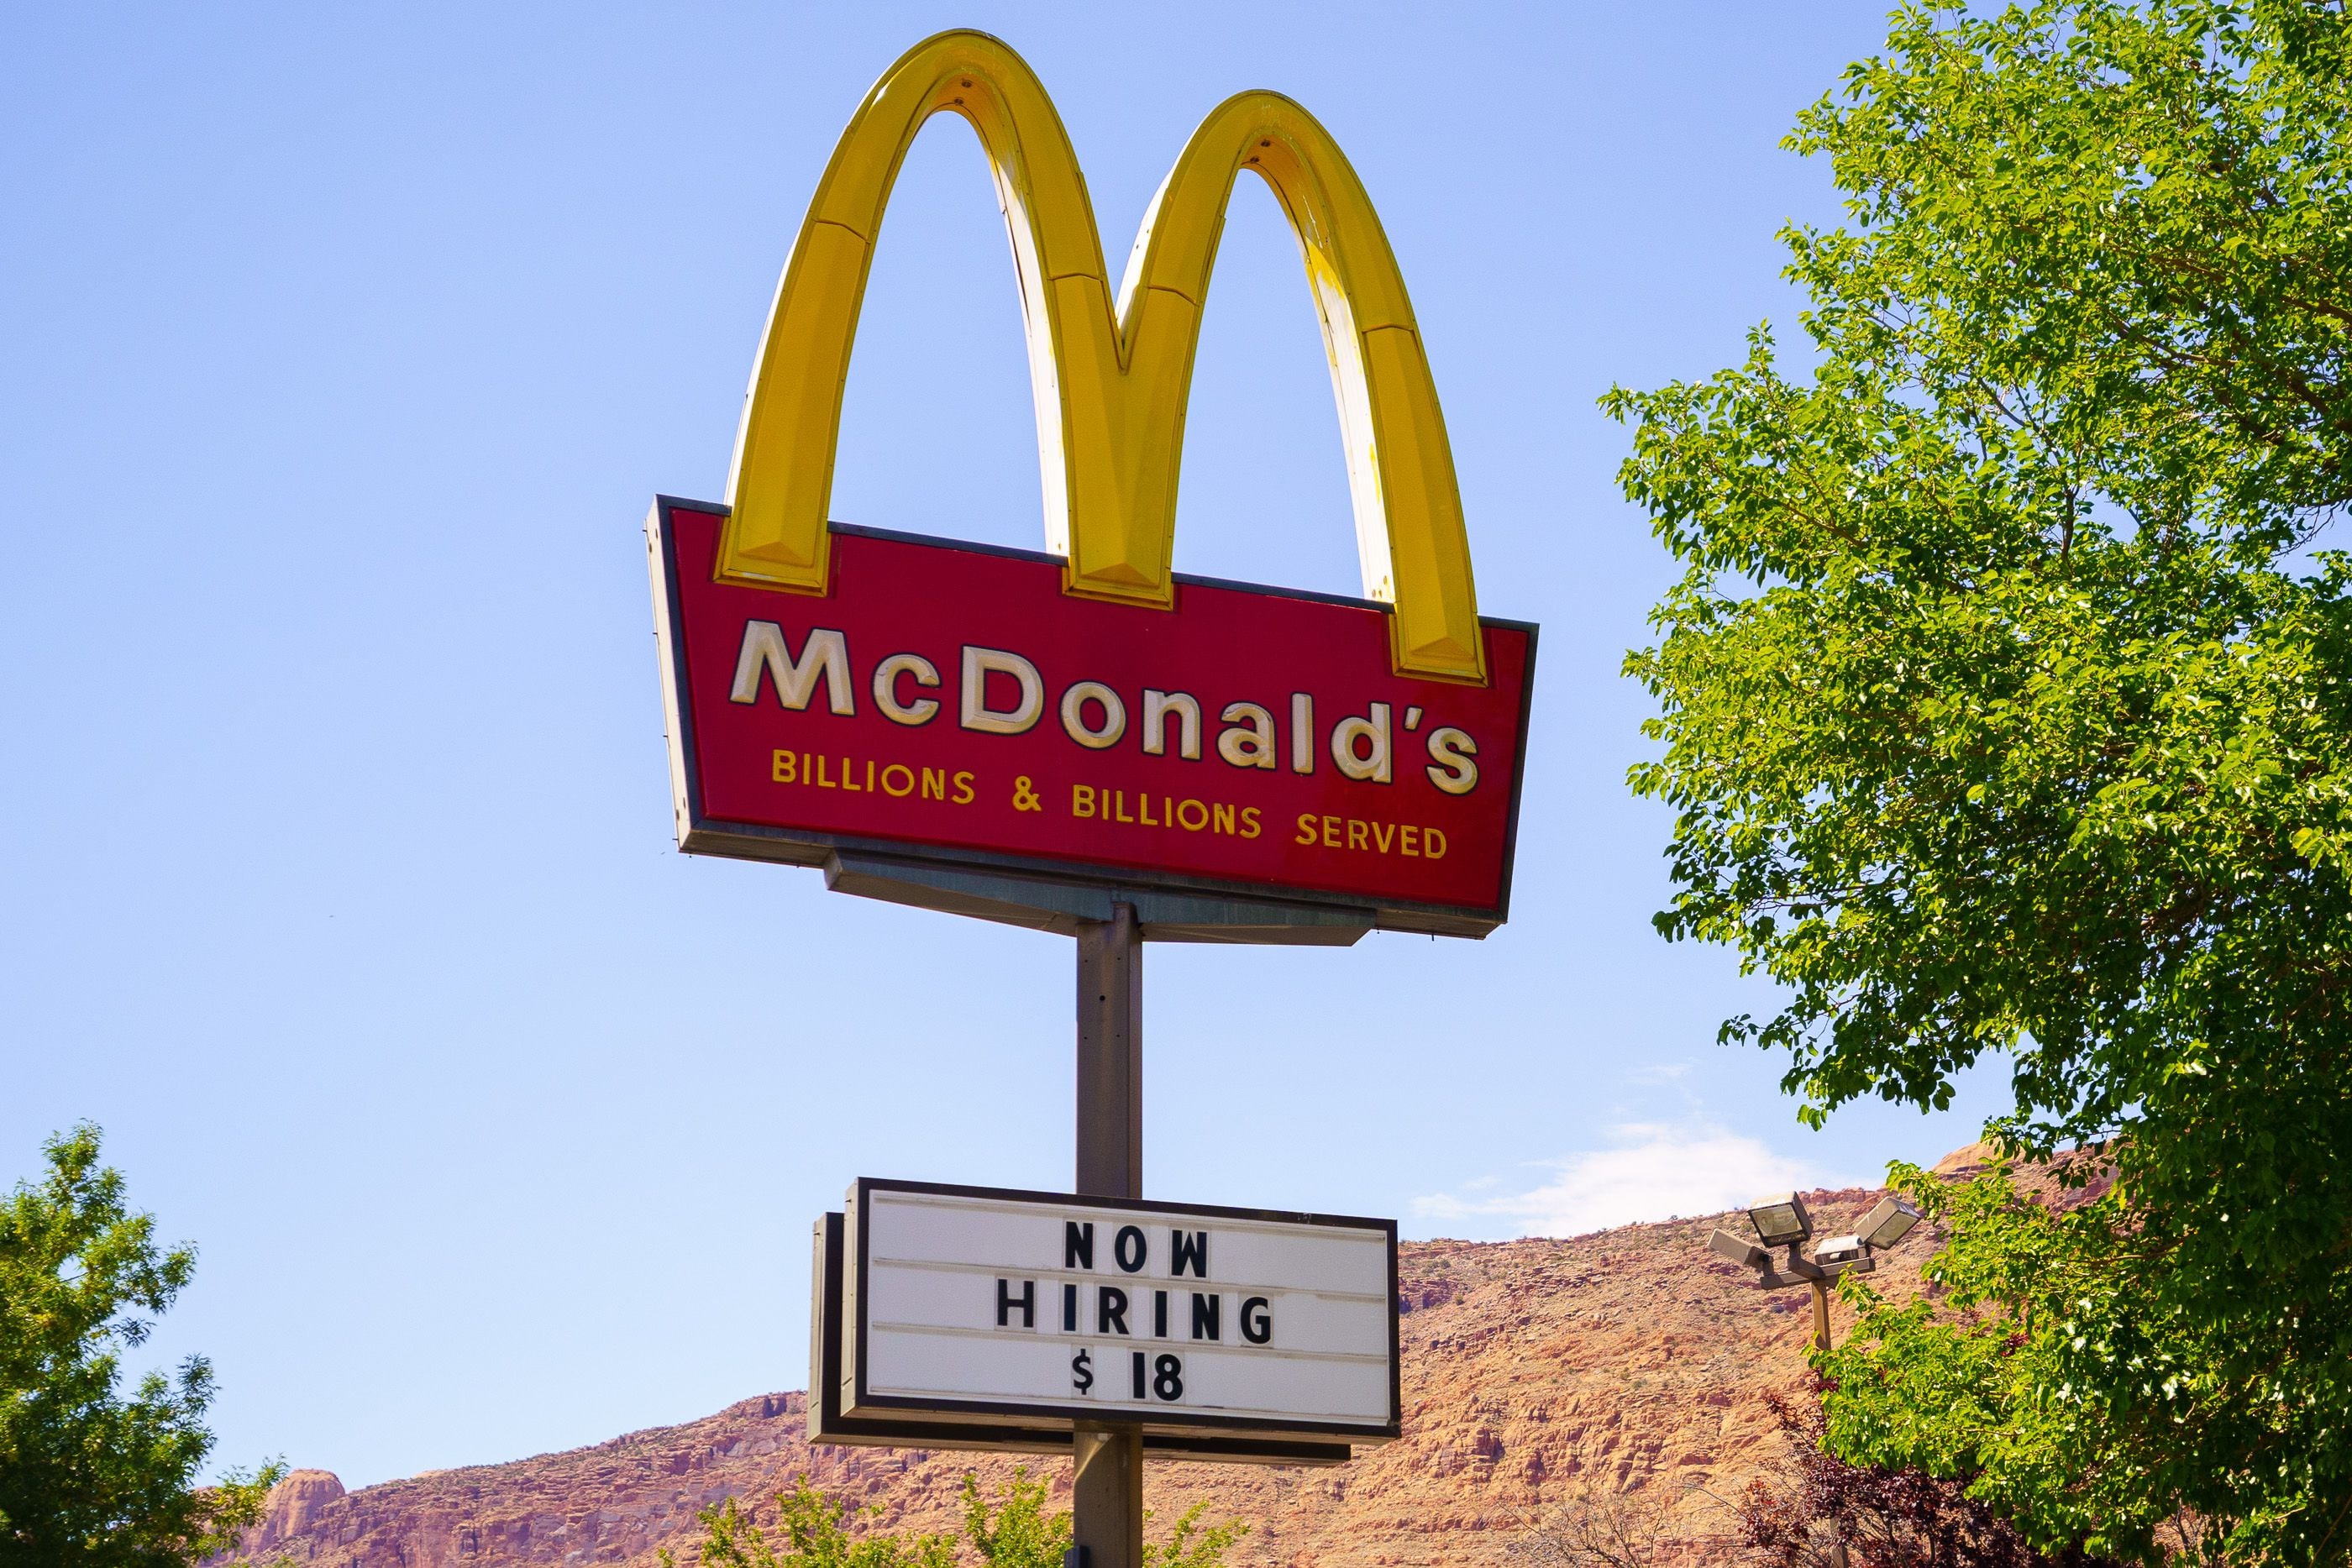 $18 an hour to work at McDonald's? Moab's labor shortage means higher pay —  if you can find housing